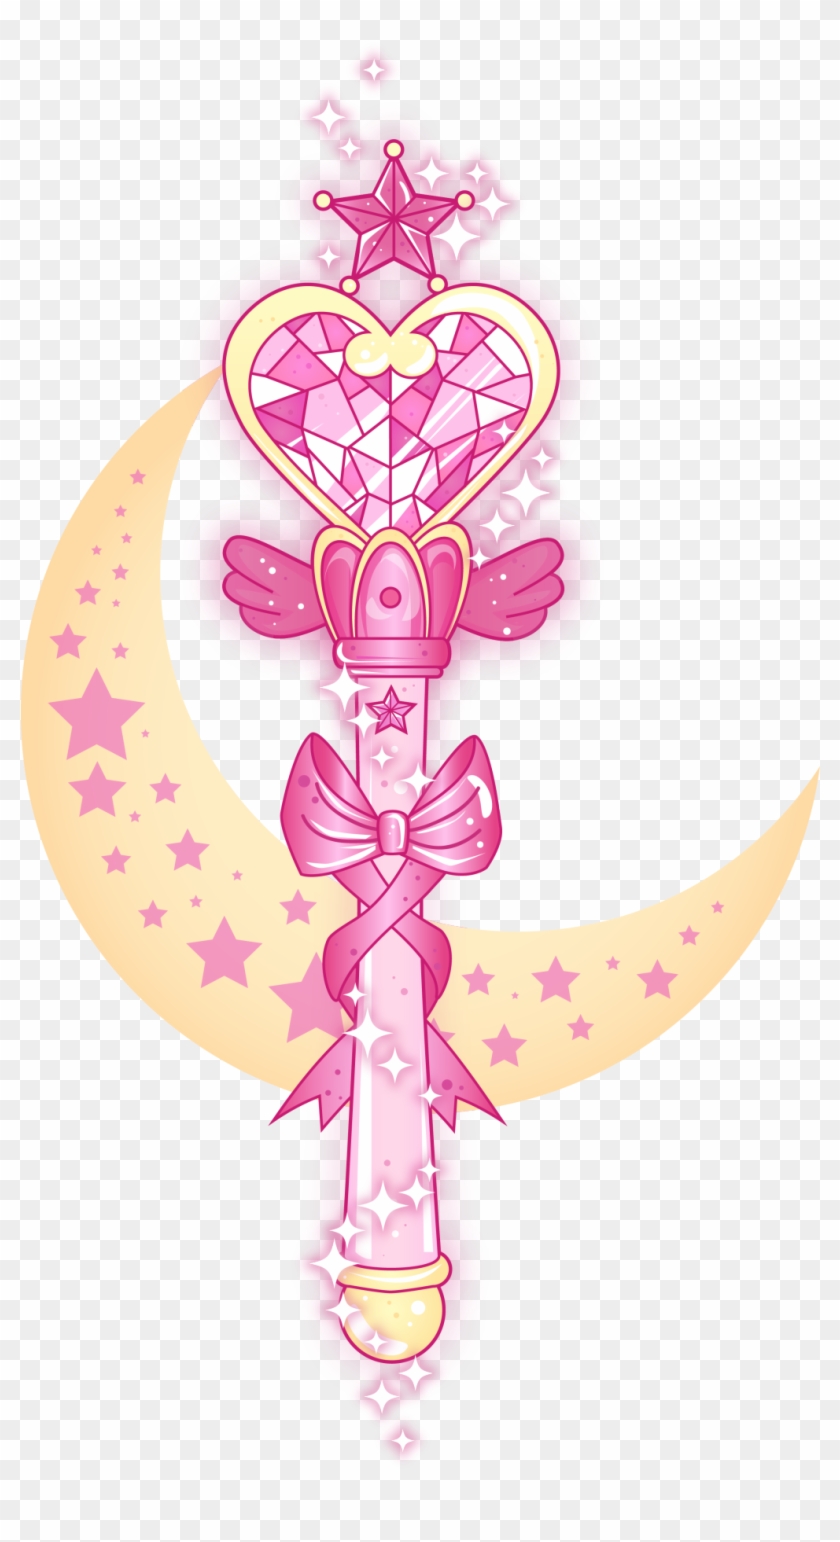 Made Another 'fight Like A Mahou Shoujo' Piece - Magical Girl Wand Designs #989637